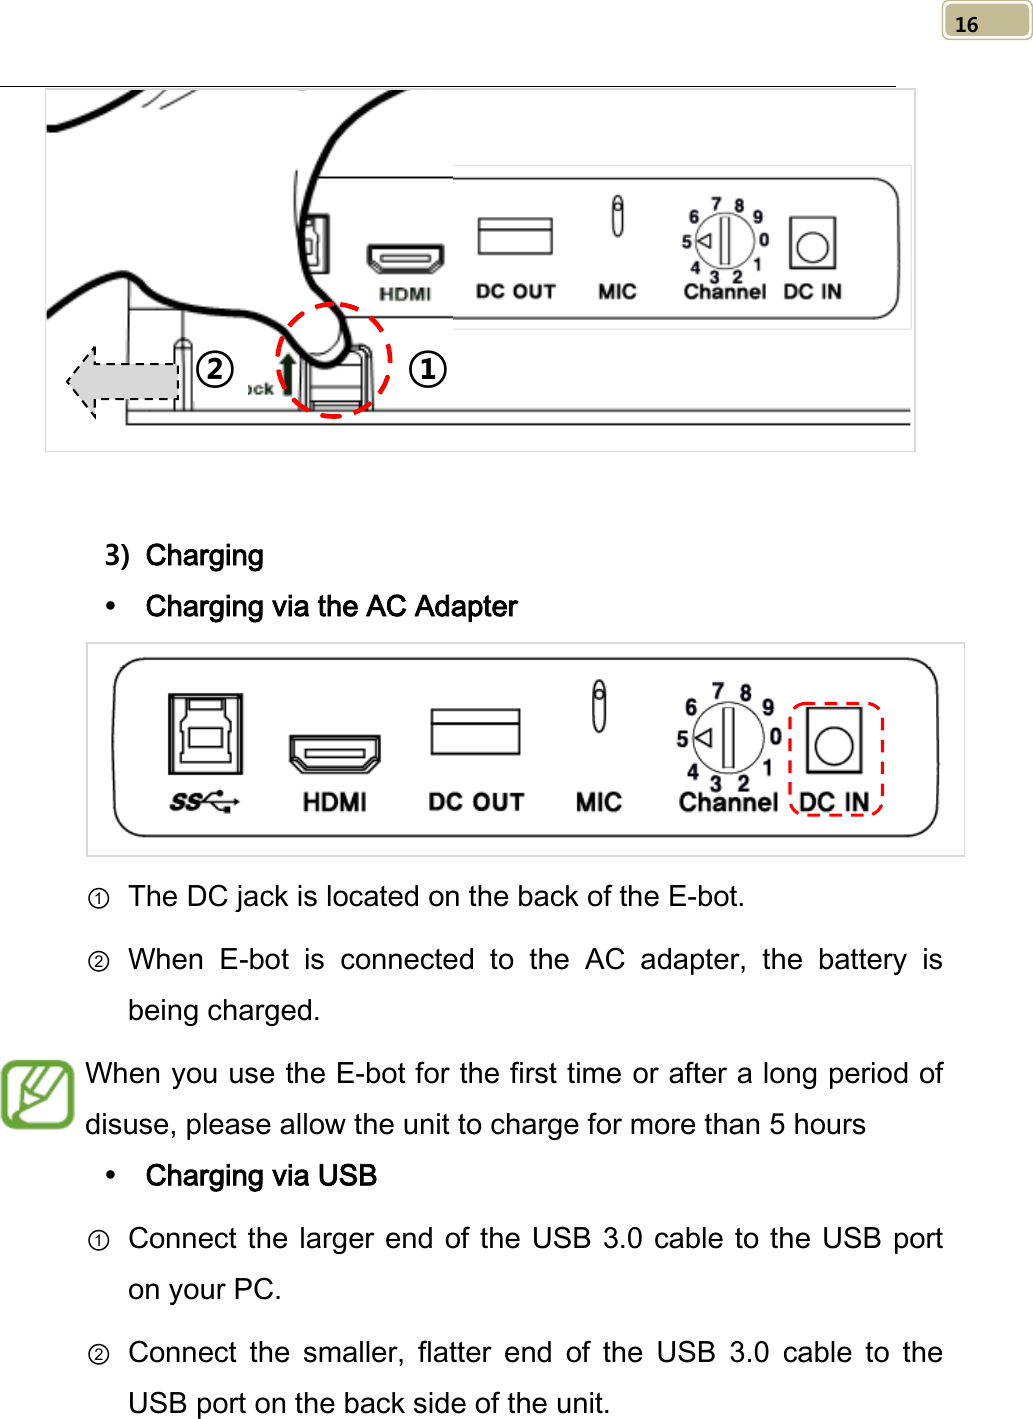   16     3) Charging  Charging via the AC Adapter  ① The DC jack is located on the back of the E-bot.   ② When E-bot is connected to  the  AC  adapter,  the battery is being charged.   When you use the E-bot for the first time or after a long period of disuse, please allow the unit to charge for more than 5 hours  Charging via USB ① Connect the larger end of the USB 3.0 cable to the USB port on your PC. ② Connect the smaller, flatter end of the USB 3.0 cable to the USB port on the back side of the unit. ② ① 